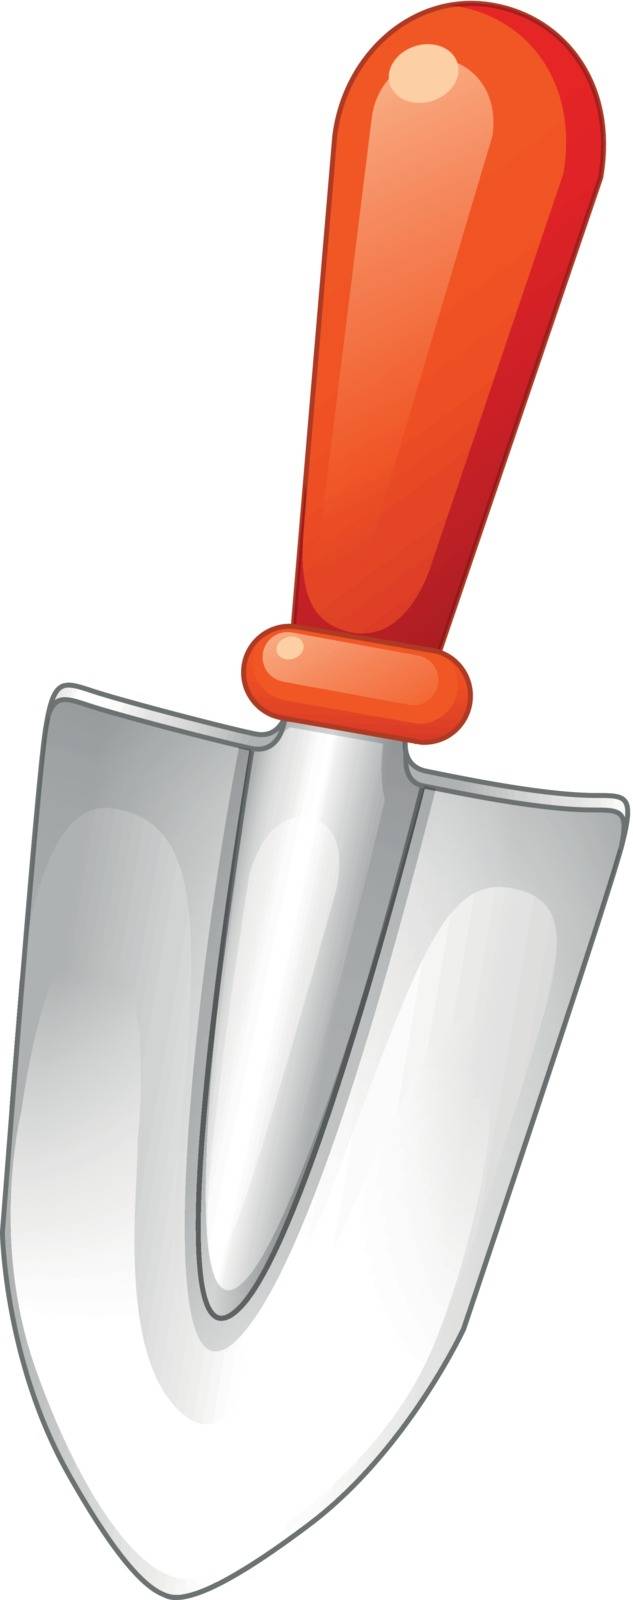 Illustration of a construction tool on a white background